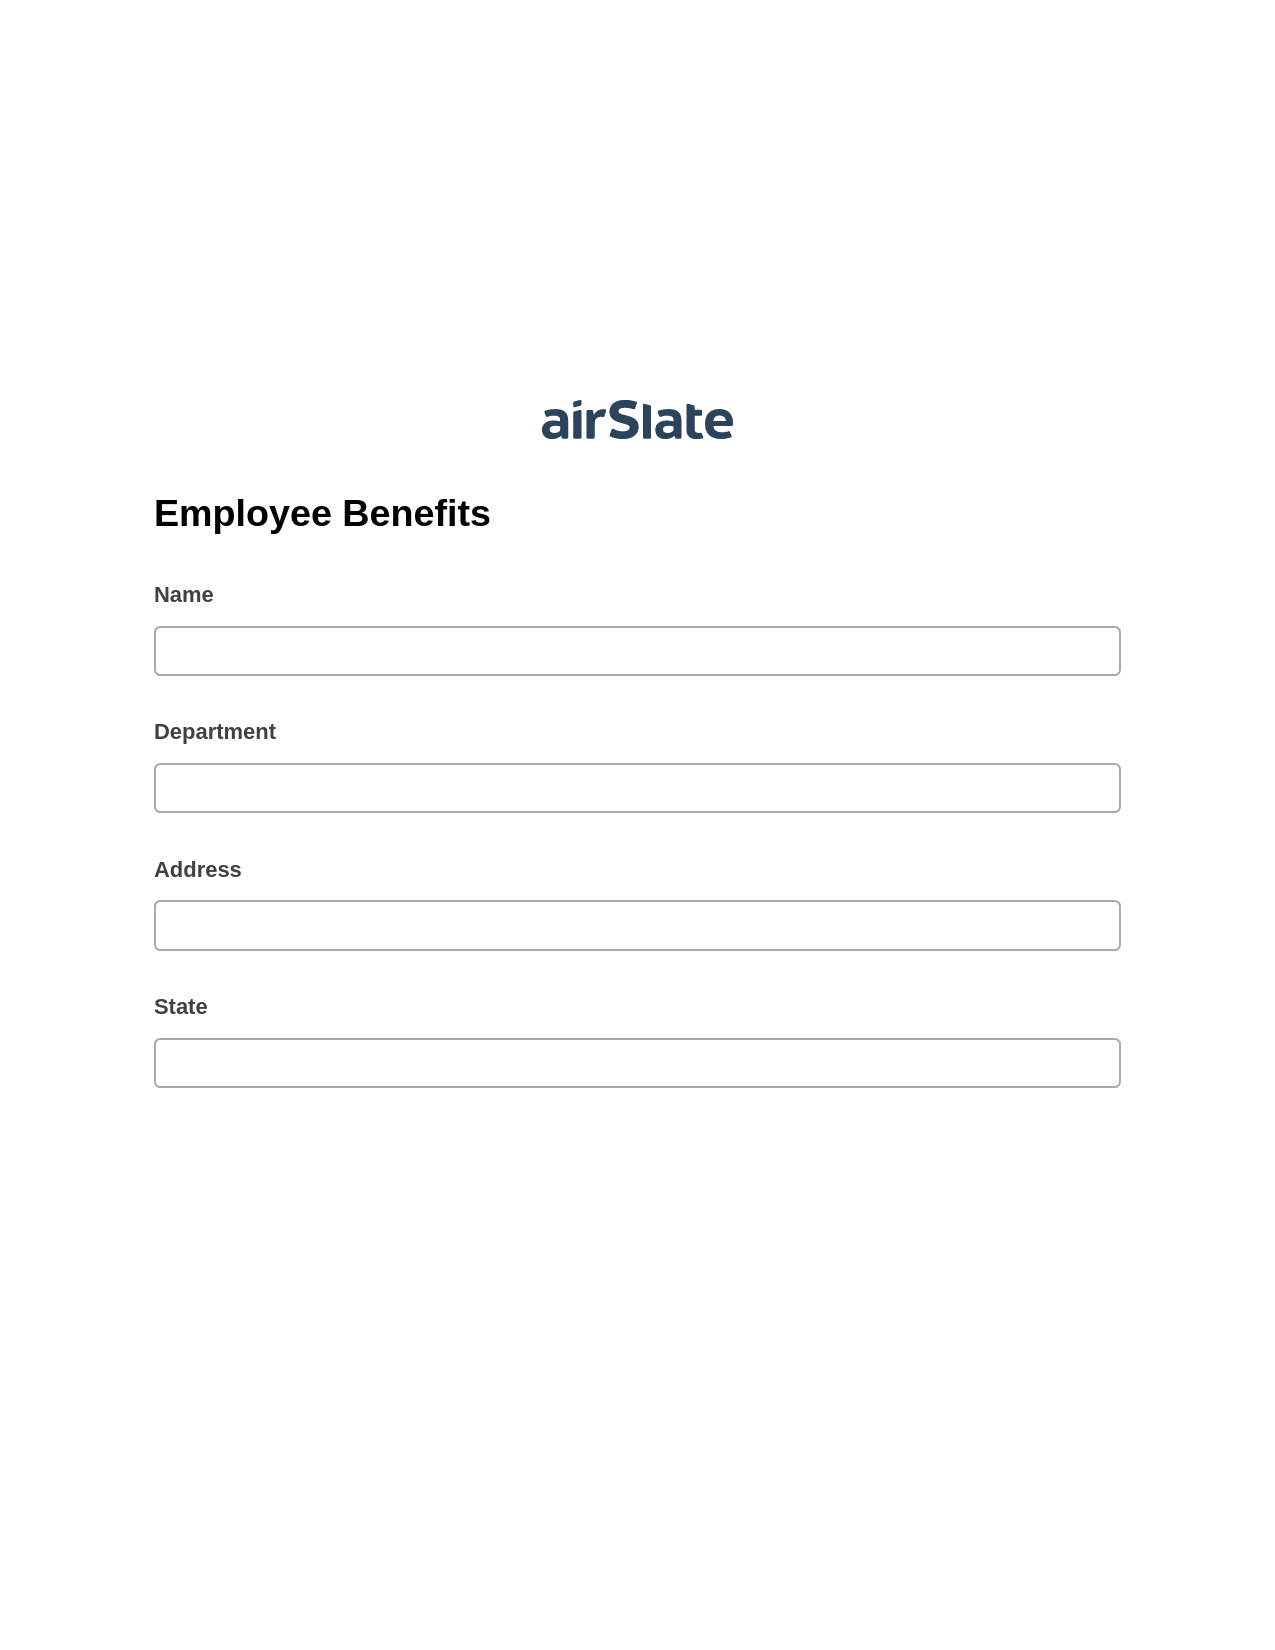 Employee Benefits Pre-fill Dropdowns from Excel Bot, Invoke Salesforce Process Bot, Export to Formstack Documents Bot